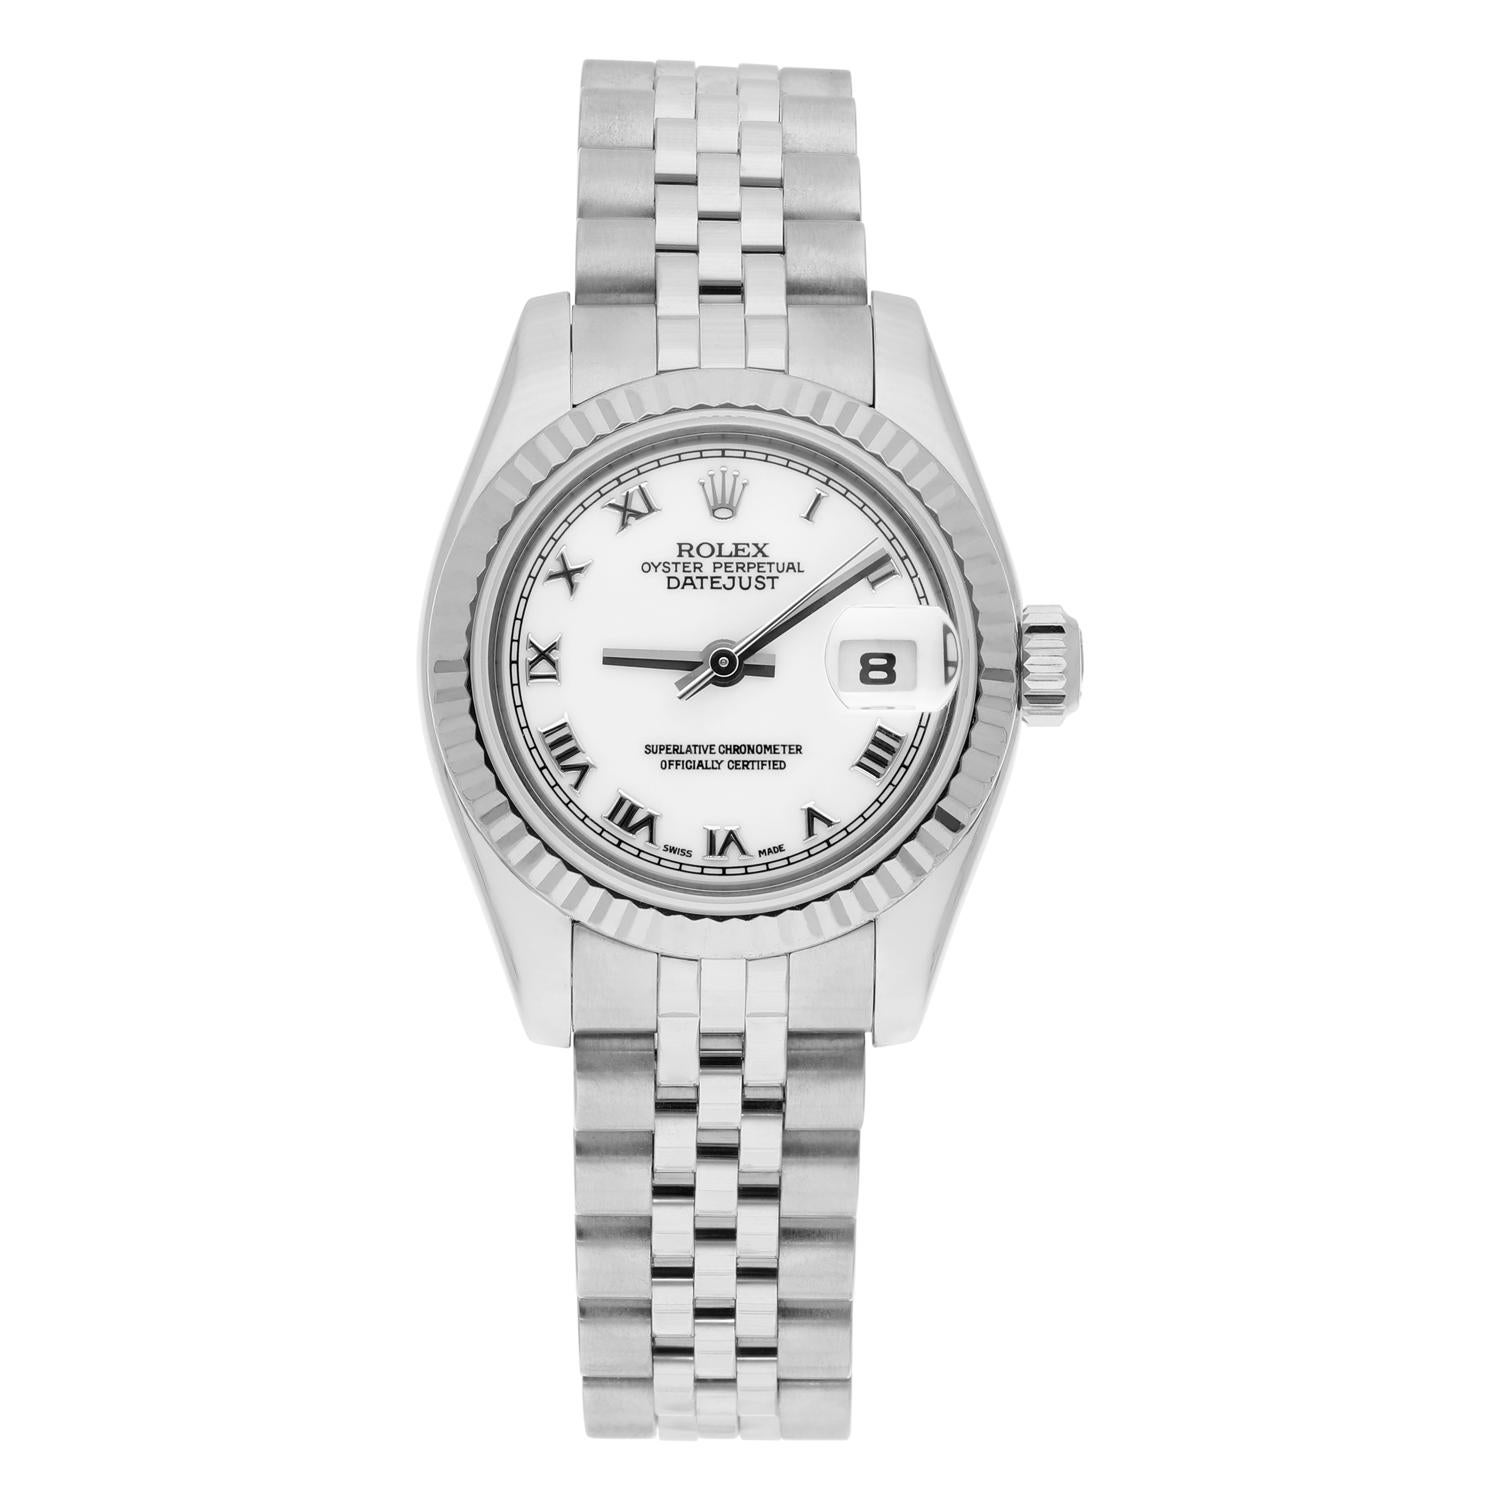 Introducing the stunning Rolex Lady-Datejust 179174 wristwatch, a timeless piece that exudes luxury and sophistication. This Swiss-made watch features a round 26mm case made of stainless steel and a white gold fluted bezel. The elegant white dial